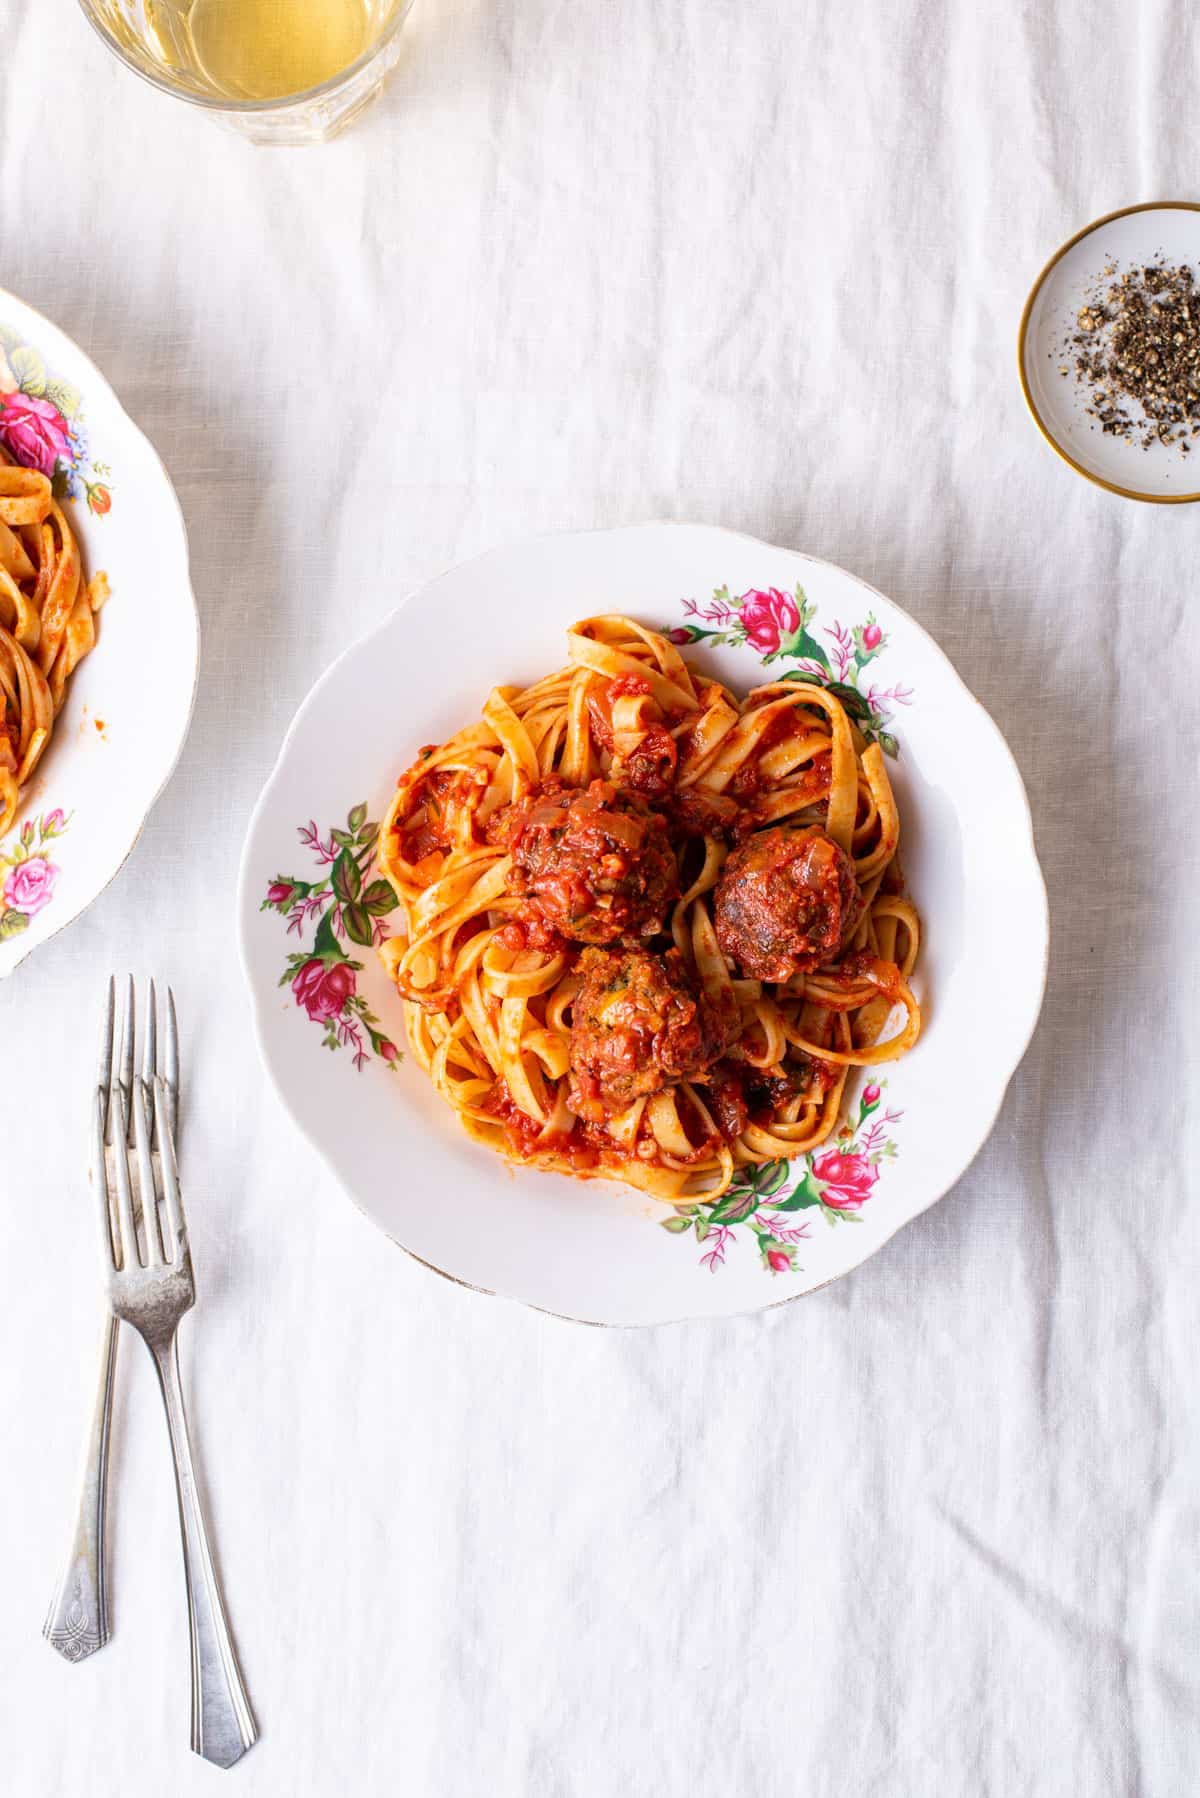 Tempeh meatballs with fettuccine and red sauce in vintage plates on a white tablecloth.